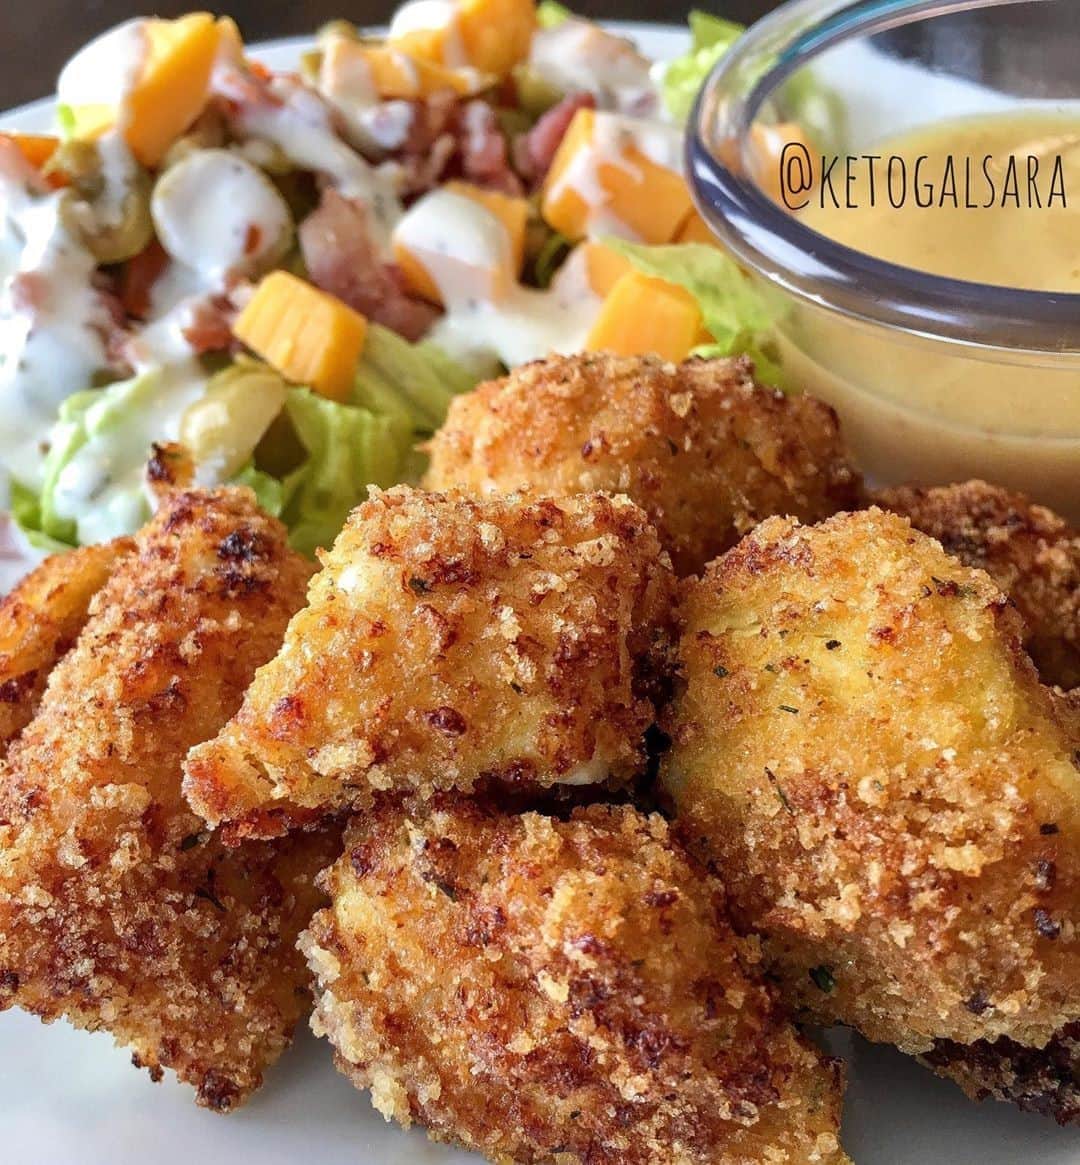 Flavorgod Seasoningsさんのインスタグラム写真 - (Flavorgod SeasoningsInstagram)「🐔 Flavor God Seasoned Ketofied Chick Fil-A nuggets⁠ -⁠ Seasoned with FlavorGod Ranch Seasoning⁠ By Customer @ketogalsara⁠ -⁠ KETO friendly flavors available here ⬇️⁠ Click link in the bio -> @flavorgod⁠ www.flavorgod.com⁠ -⁠ 🔹Marinate chicken strips in PICKLE JUICE for several hours. (I do mine for about 8 or more)⁠ 🔹Drain chicken and cut into nugget chunks or keep in strips⁠ 🔹Pour @porkkinggood pork rind crumbs into bowl and add @flavorgod Ranch Seasoning.⁠ 🔹Egg wash chicken. I use 2 eggs and 1 tbs heavy cream for the wash..⁠ 🔹Then toss in @porkkinggood pork rind crumb/ seasoning mixture until well covered..⁠ 🔹spray with olive oil or oil of choice .⁠ 🔹Air fry at 360* for 12 minutes on oiled skewer rack in air fryer.⁠ 🔹Dipped in @ghughessugarfree honey mustard 🙌🏻⁠ .⁠ . 🏷 Tag a friend who needs these nuggets⁠ . . 🚨 Link to my air fryer is in my stories and it’s on Sale🚨 .⁠ PS. DO NOT REUSE THE PICKLE JUICE. 💀⁠ -⁠ Flavor God Seasonings are:⁠ ✅ZERO CALORIES PER SERVING⁠ ✅MADE FRESH⁠ ✅MADE LOCALLY IN US⁠ ✅FREE GIFTS AT CHECKOUT⁠ ✅GLUTEN FREE⁠ ✅#PALEO & #KETO FRIENDLY⁠ -⁠ #food #foodie #flavorgod #seasonings #glutenfree #mealprep #seasonings #breakfast #lunch #dinner #yummy #delicious #foodporn ⁠」10月15日 10時01分 - flavorgod